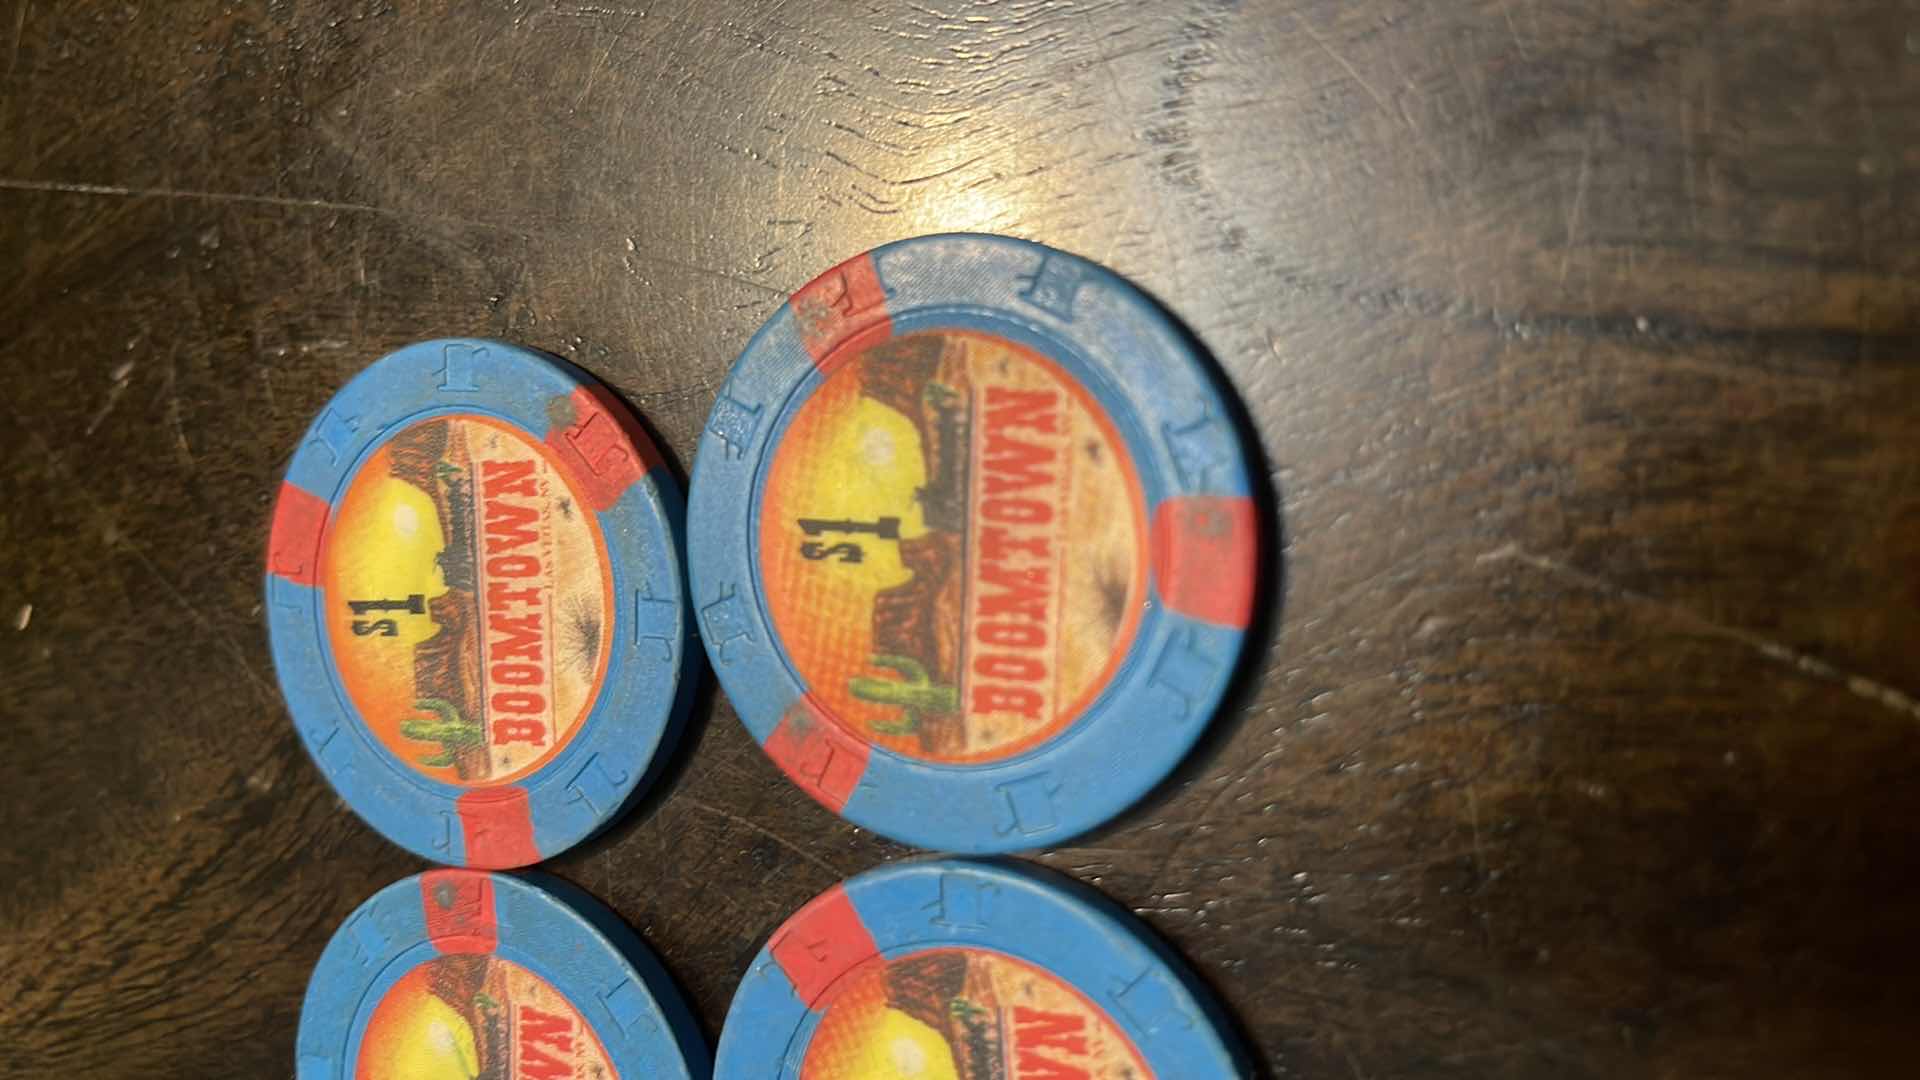 Photo 2 of (4) $1 1ST EDITION GAMING CHIPs FROM THE BOOMTOWN CASINO LAS VEGAS NV